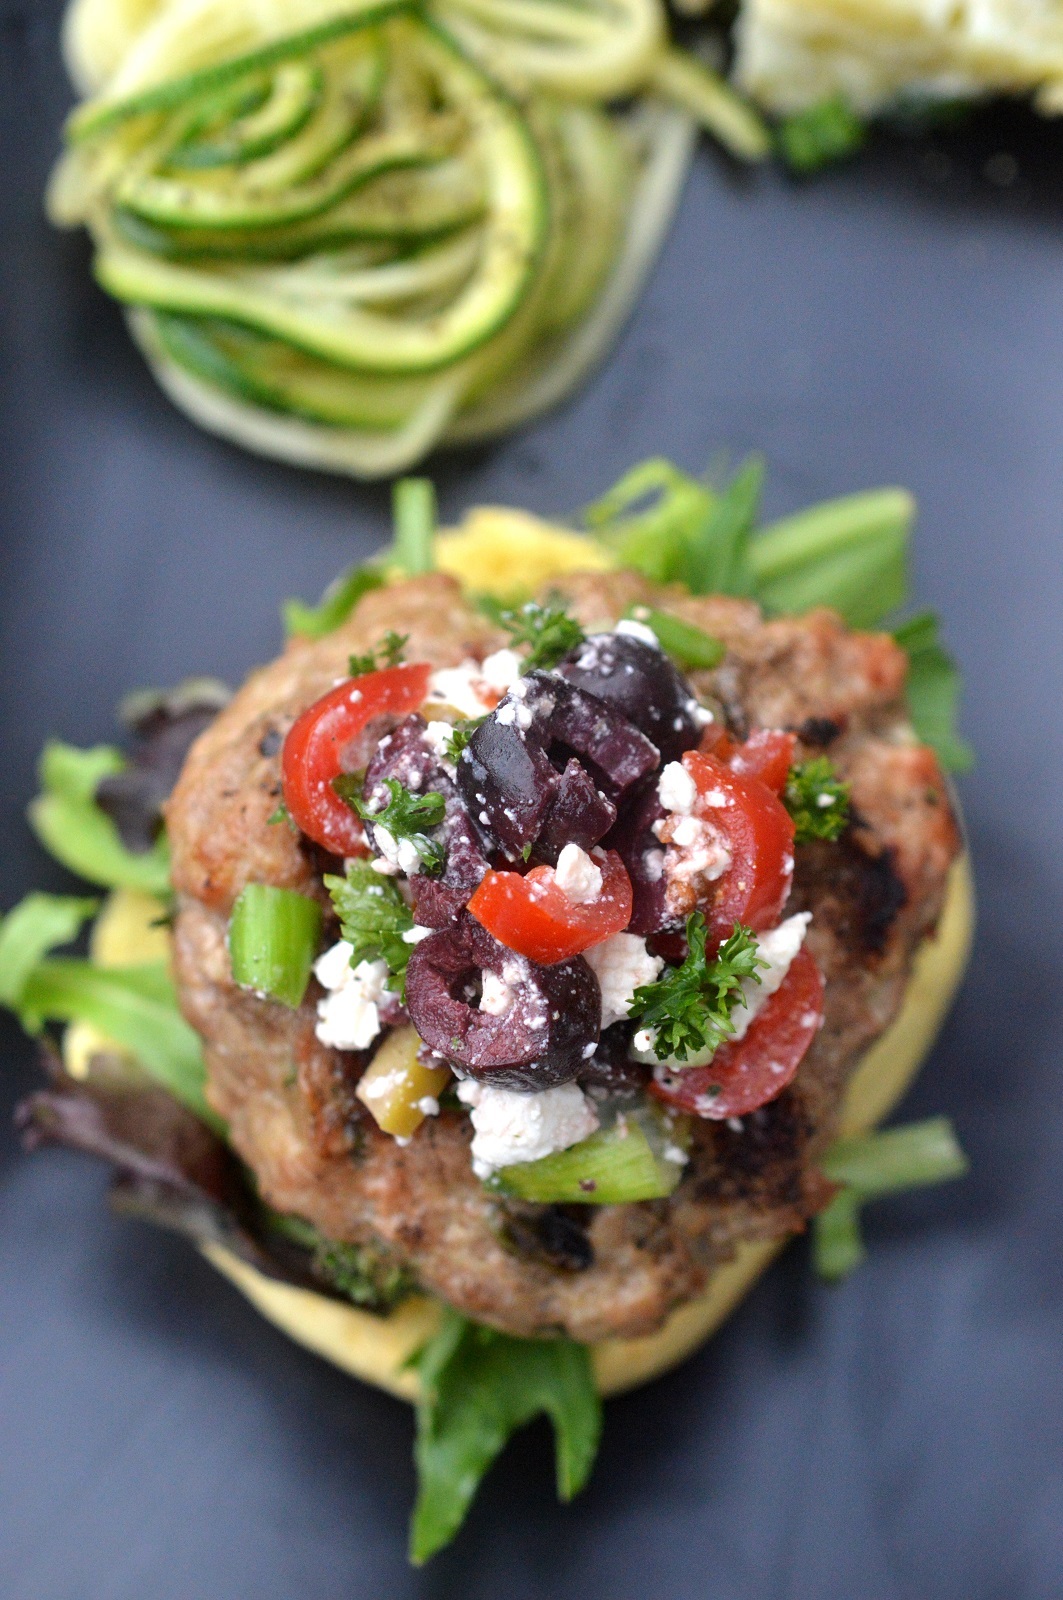 Mediterranean Burgers made with ground veal, topped with feta, tomatoes, olives and more.